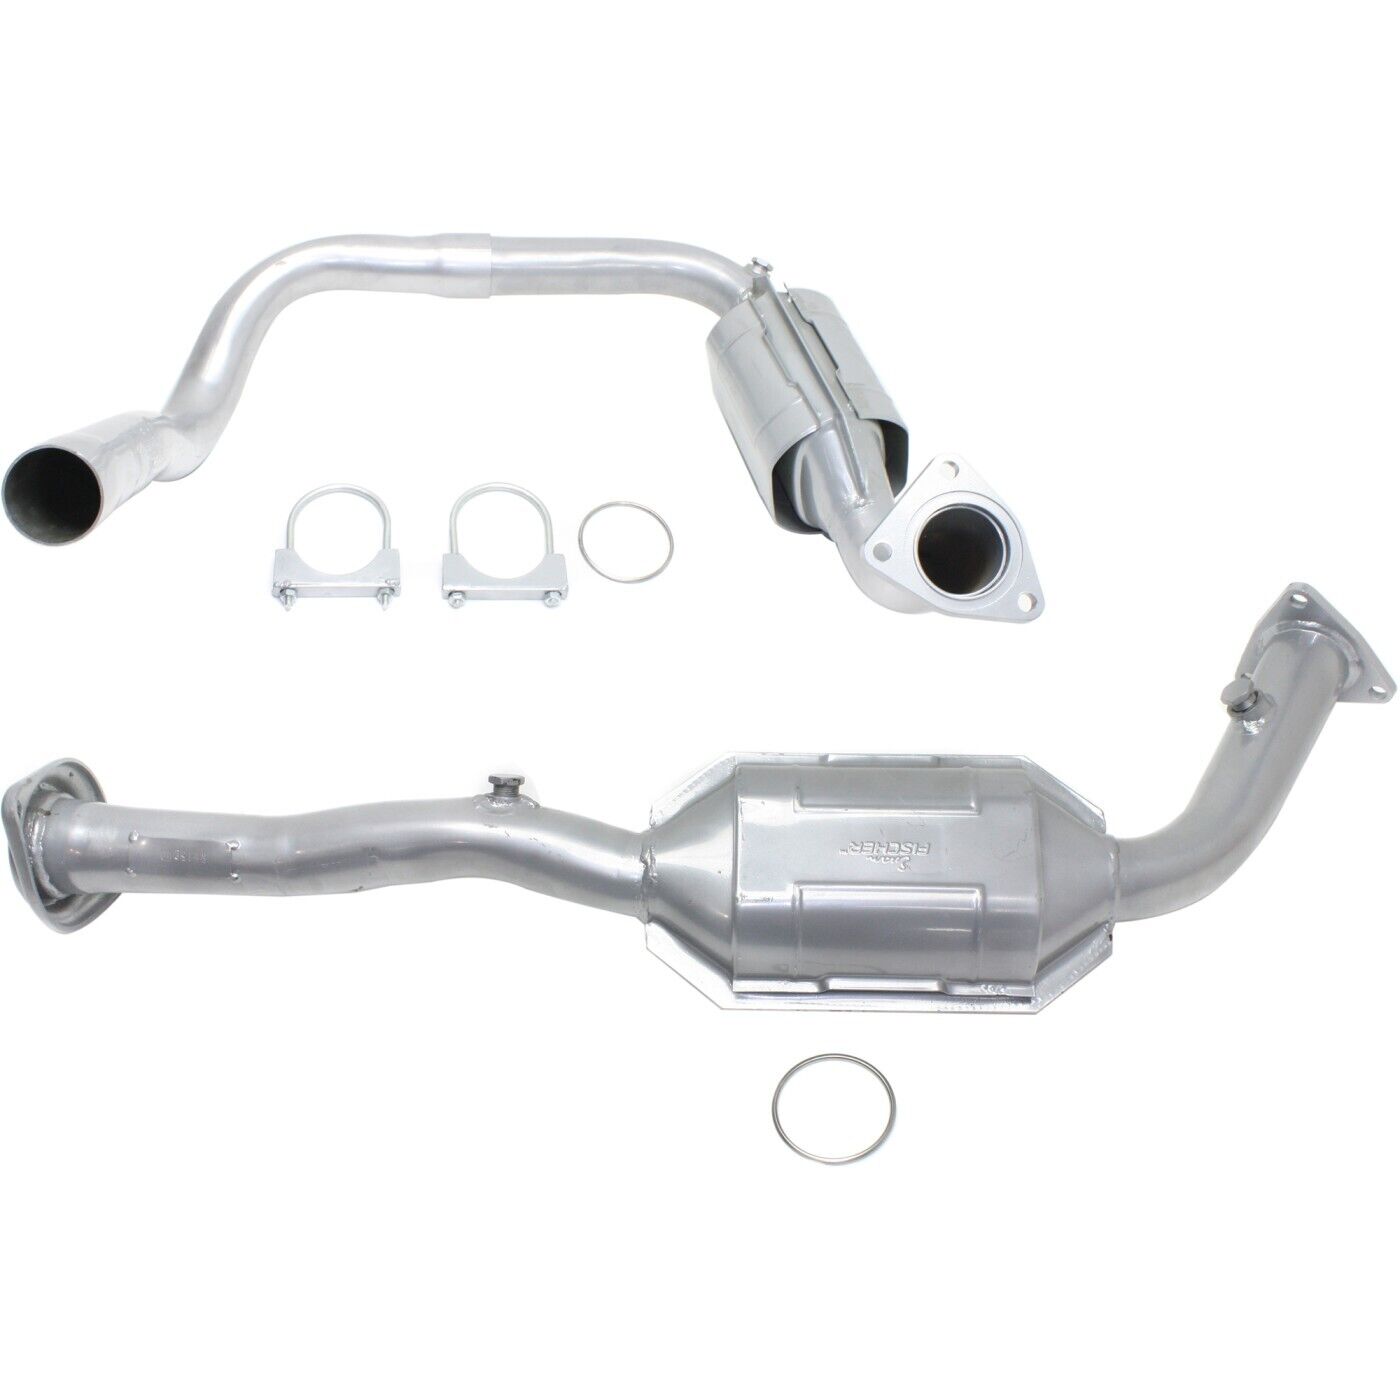 New Catalytic Converter Set for 03-06 Hummer H2 Left and Right Sides